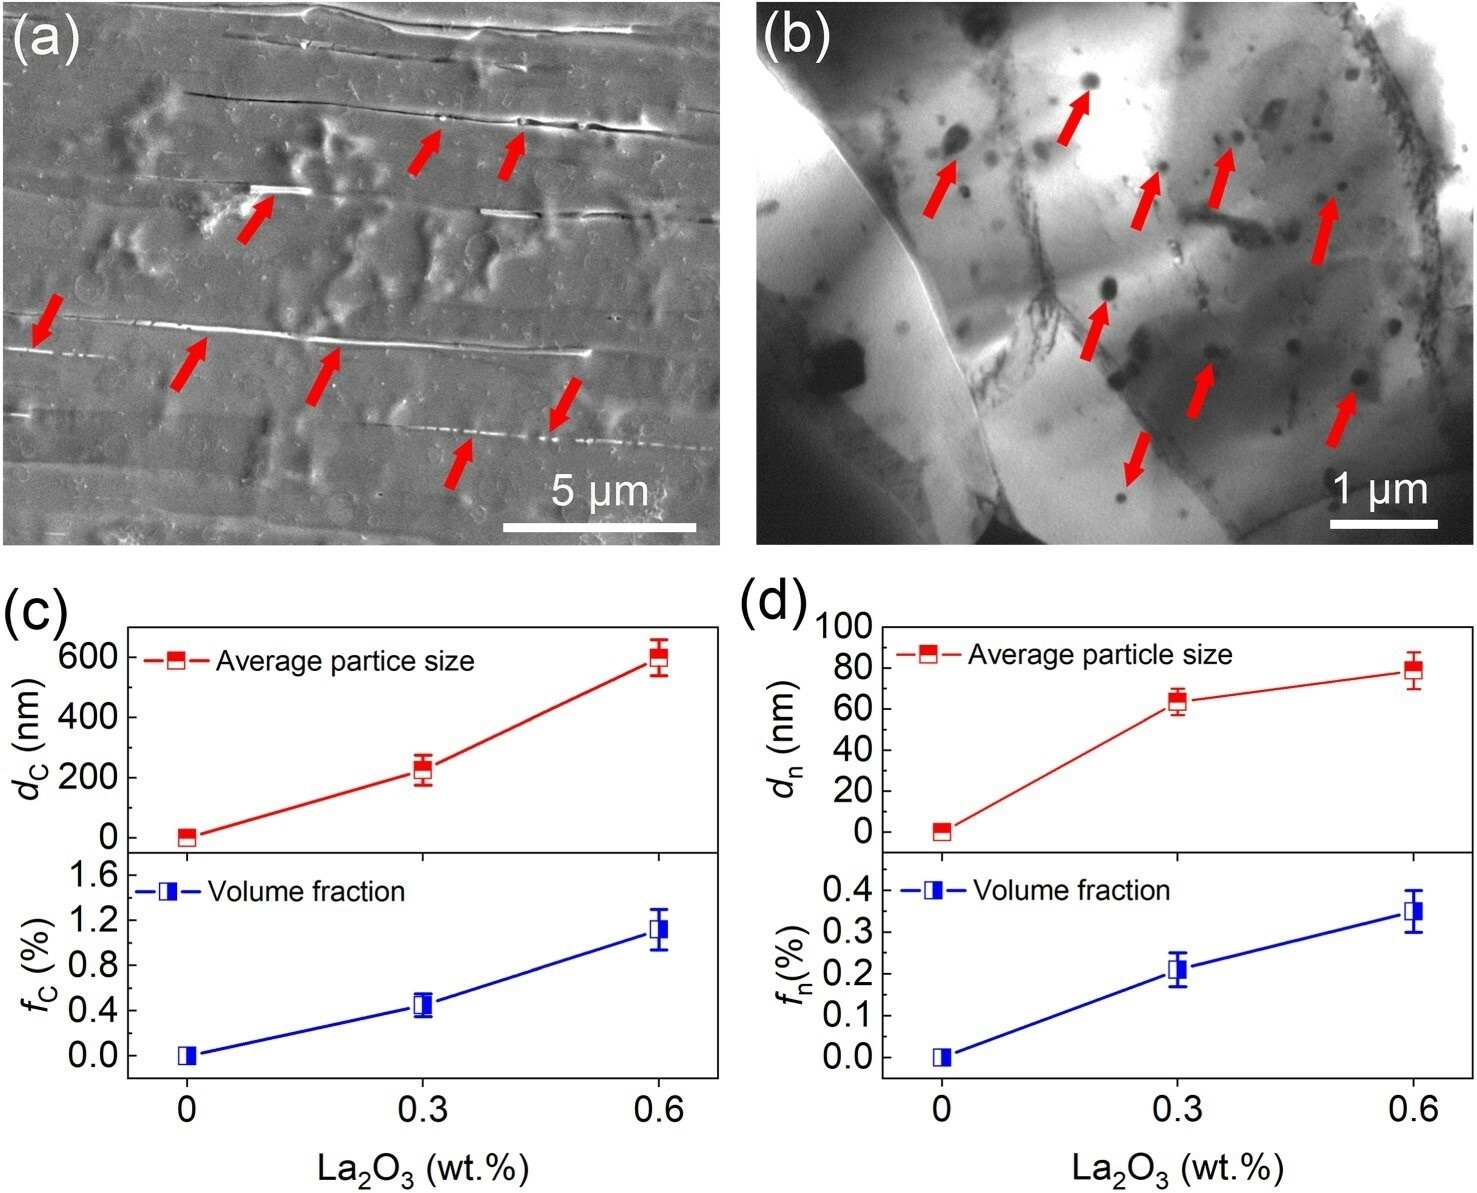 Representative SEM (a) and TEM (b) images to show the coarse La2O3 particles and nanosized La2O3 particles in the Mo-0.6LaO alloy, respectively. Both particles are respectively indicated by red arrows. Statistical results on the average size (dc or dn) and volume fraction (fc or fn) of the two types of particles (c: coarse La2O3, d: nanosized La2O3 particles).